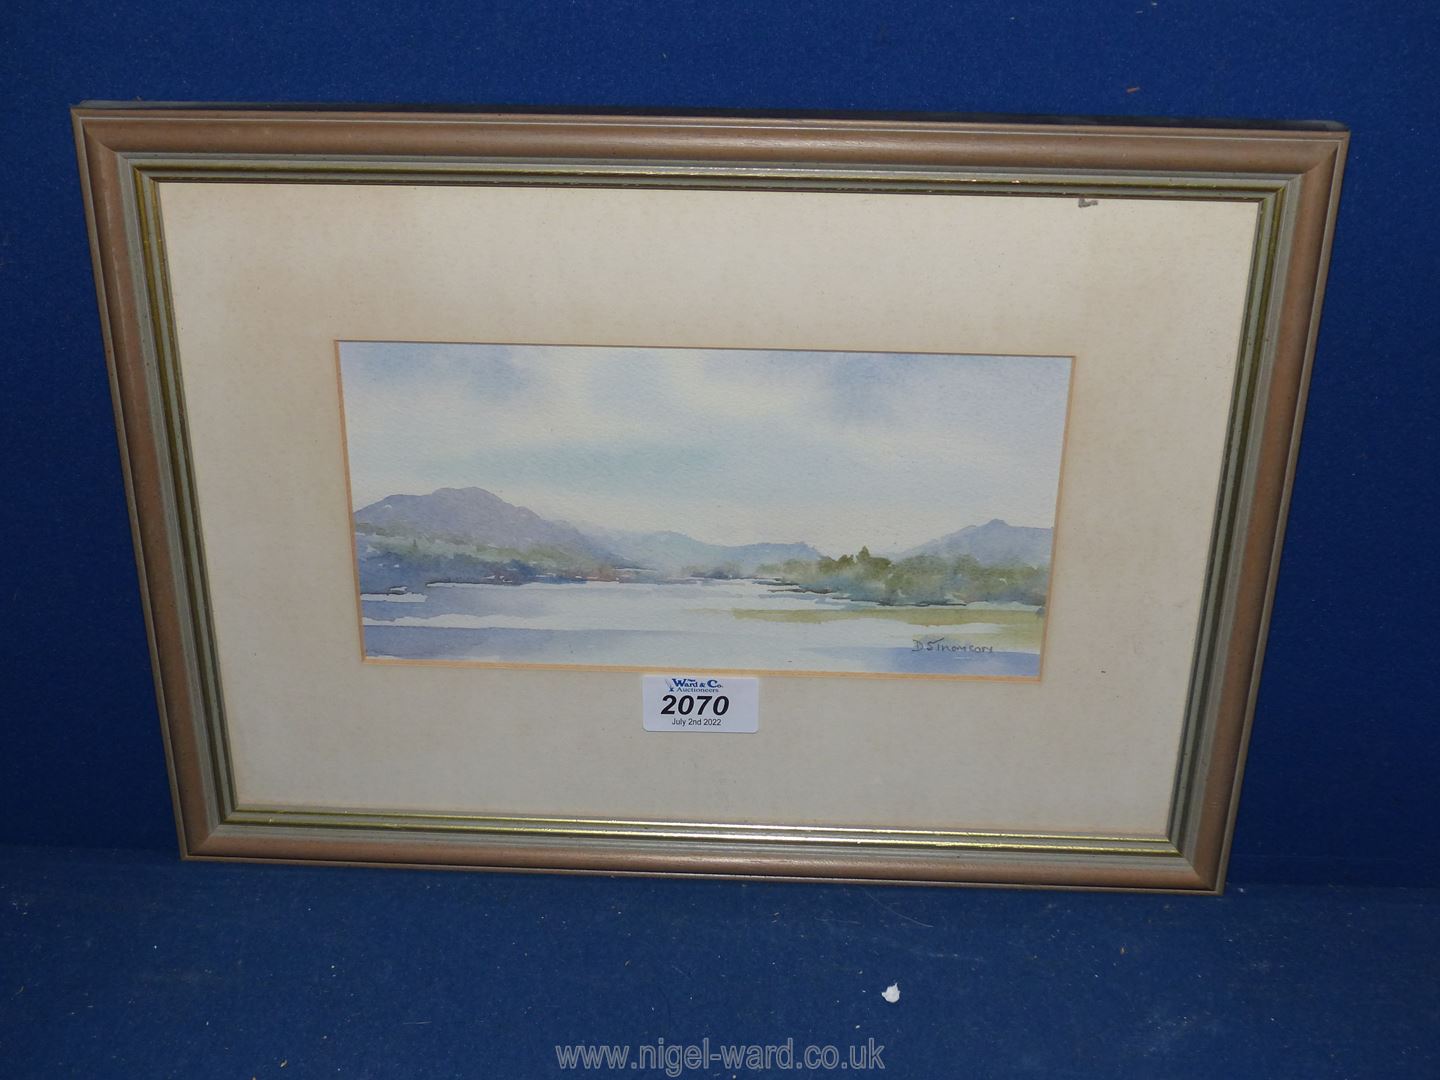 A framed and mounted watercolour depicting a river landscape with trees and hills in the distance,